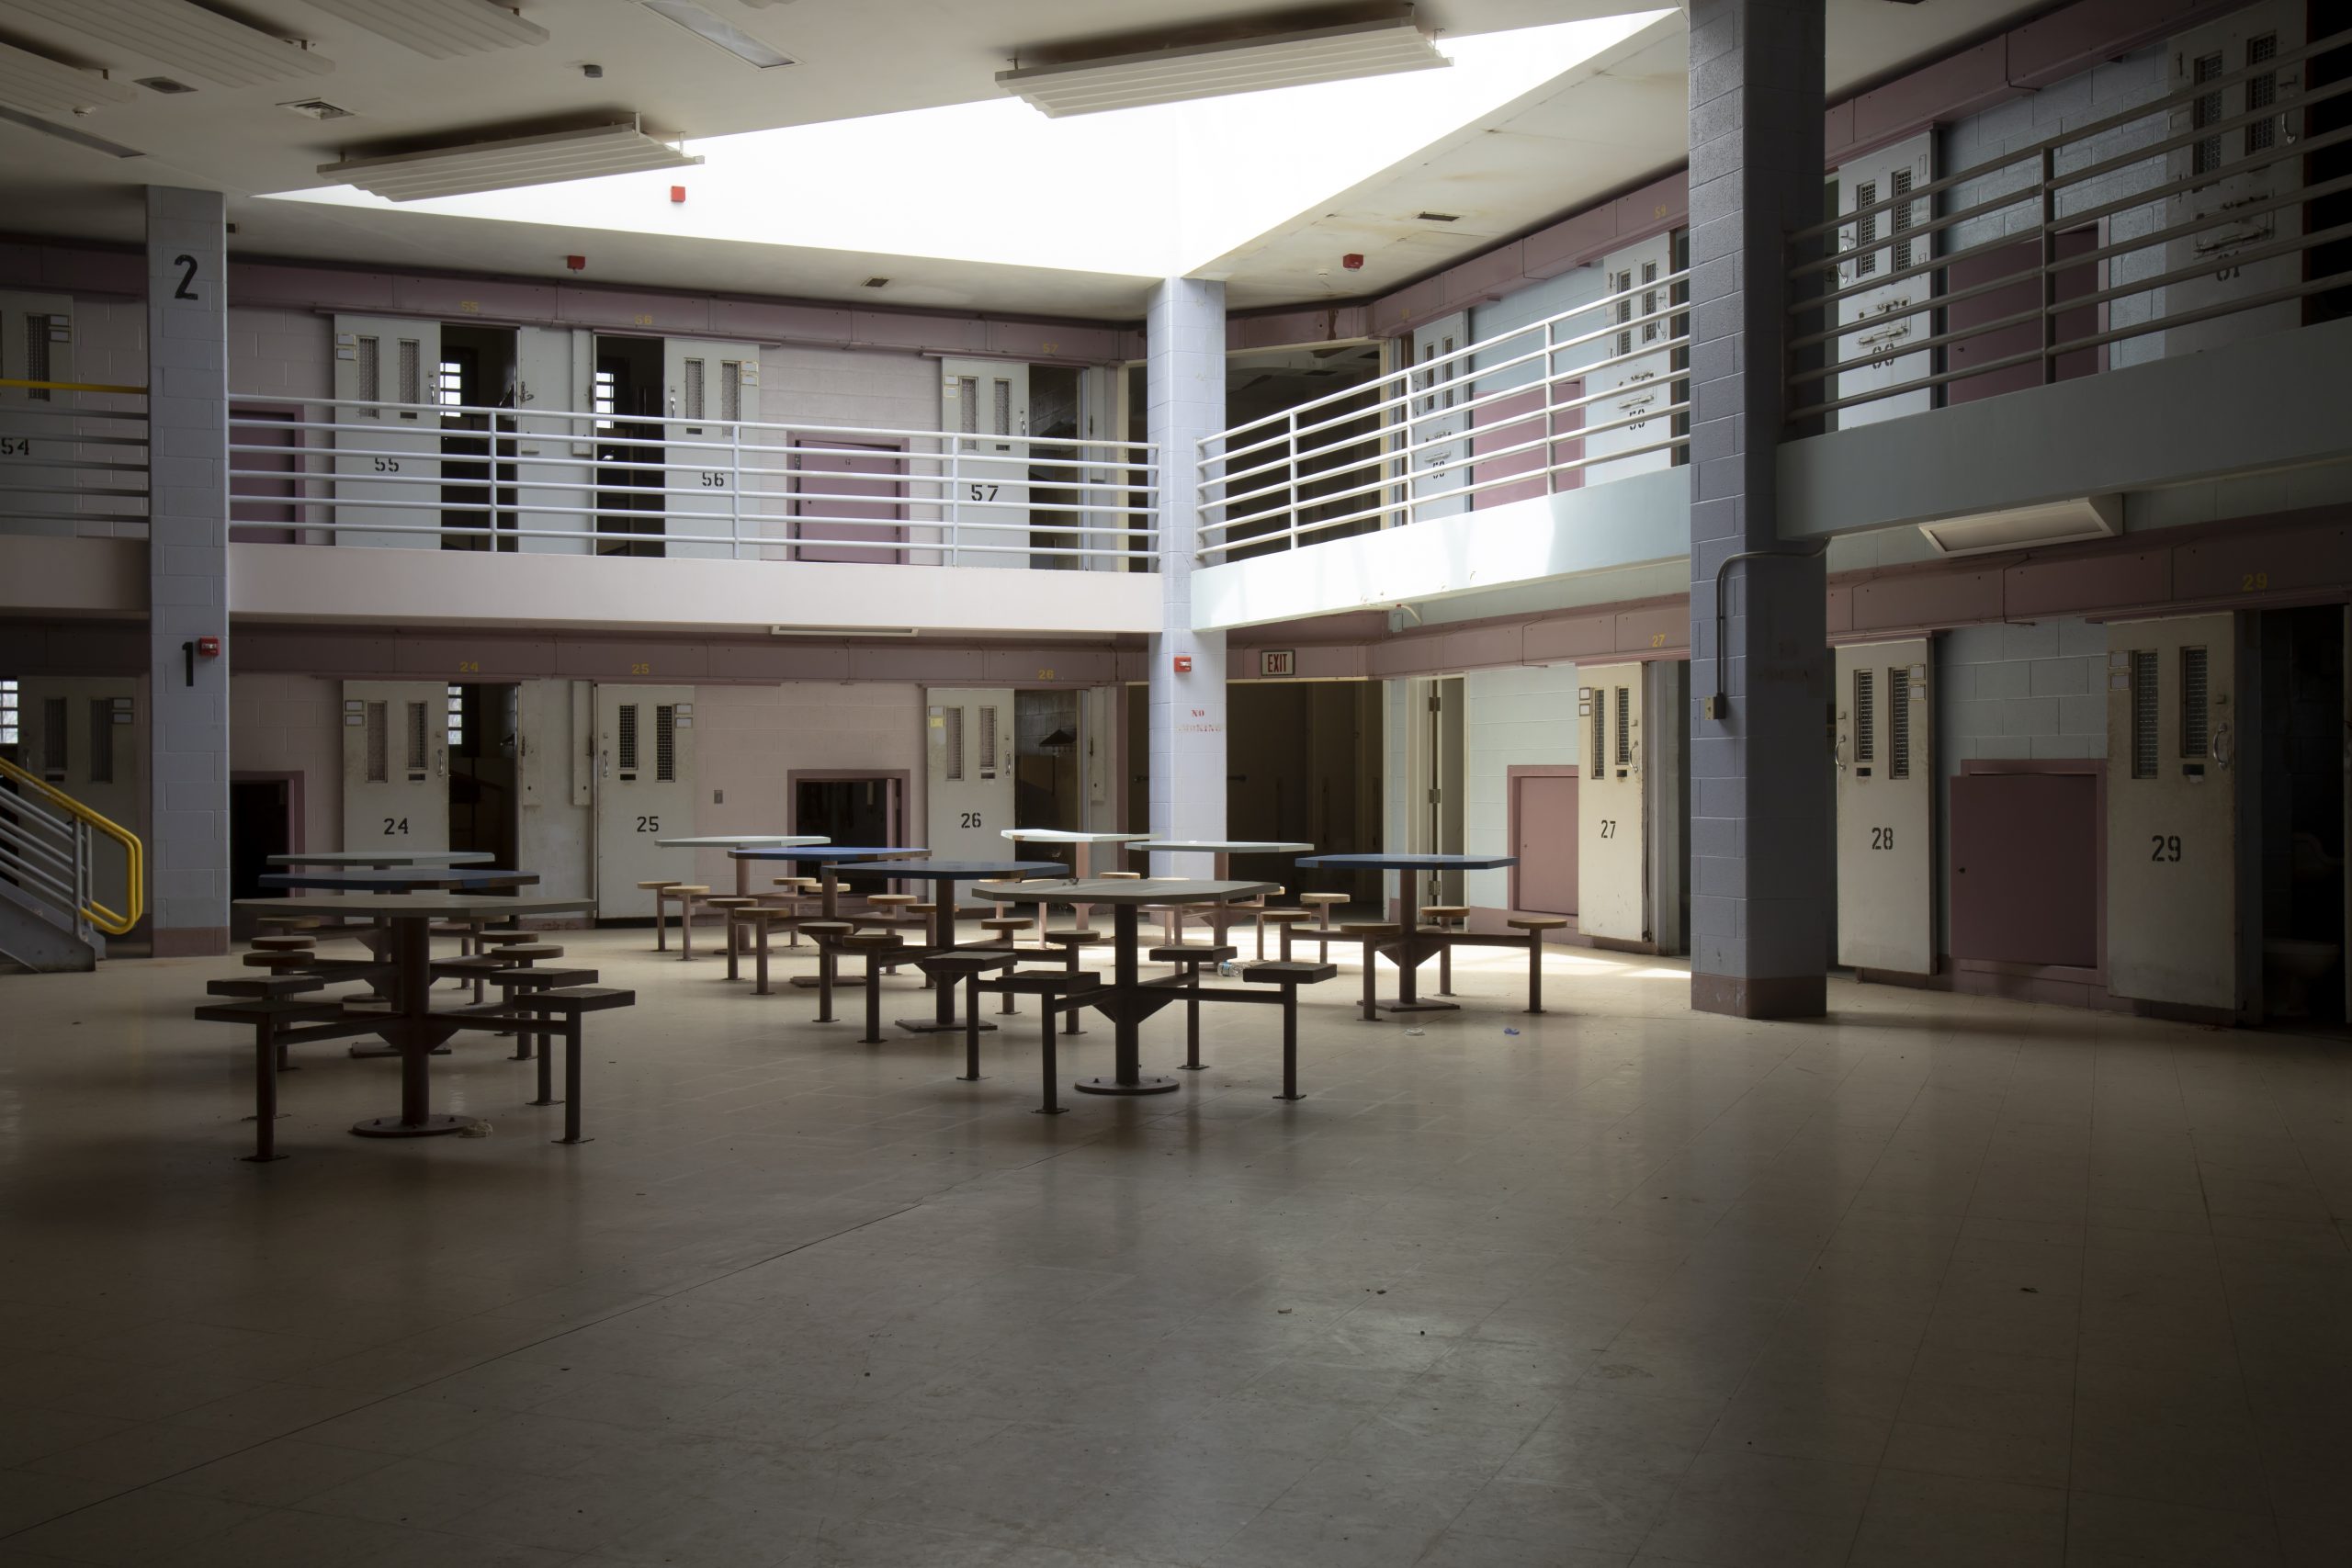 Inmates: State of county jails is woeful